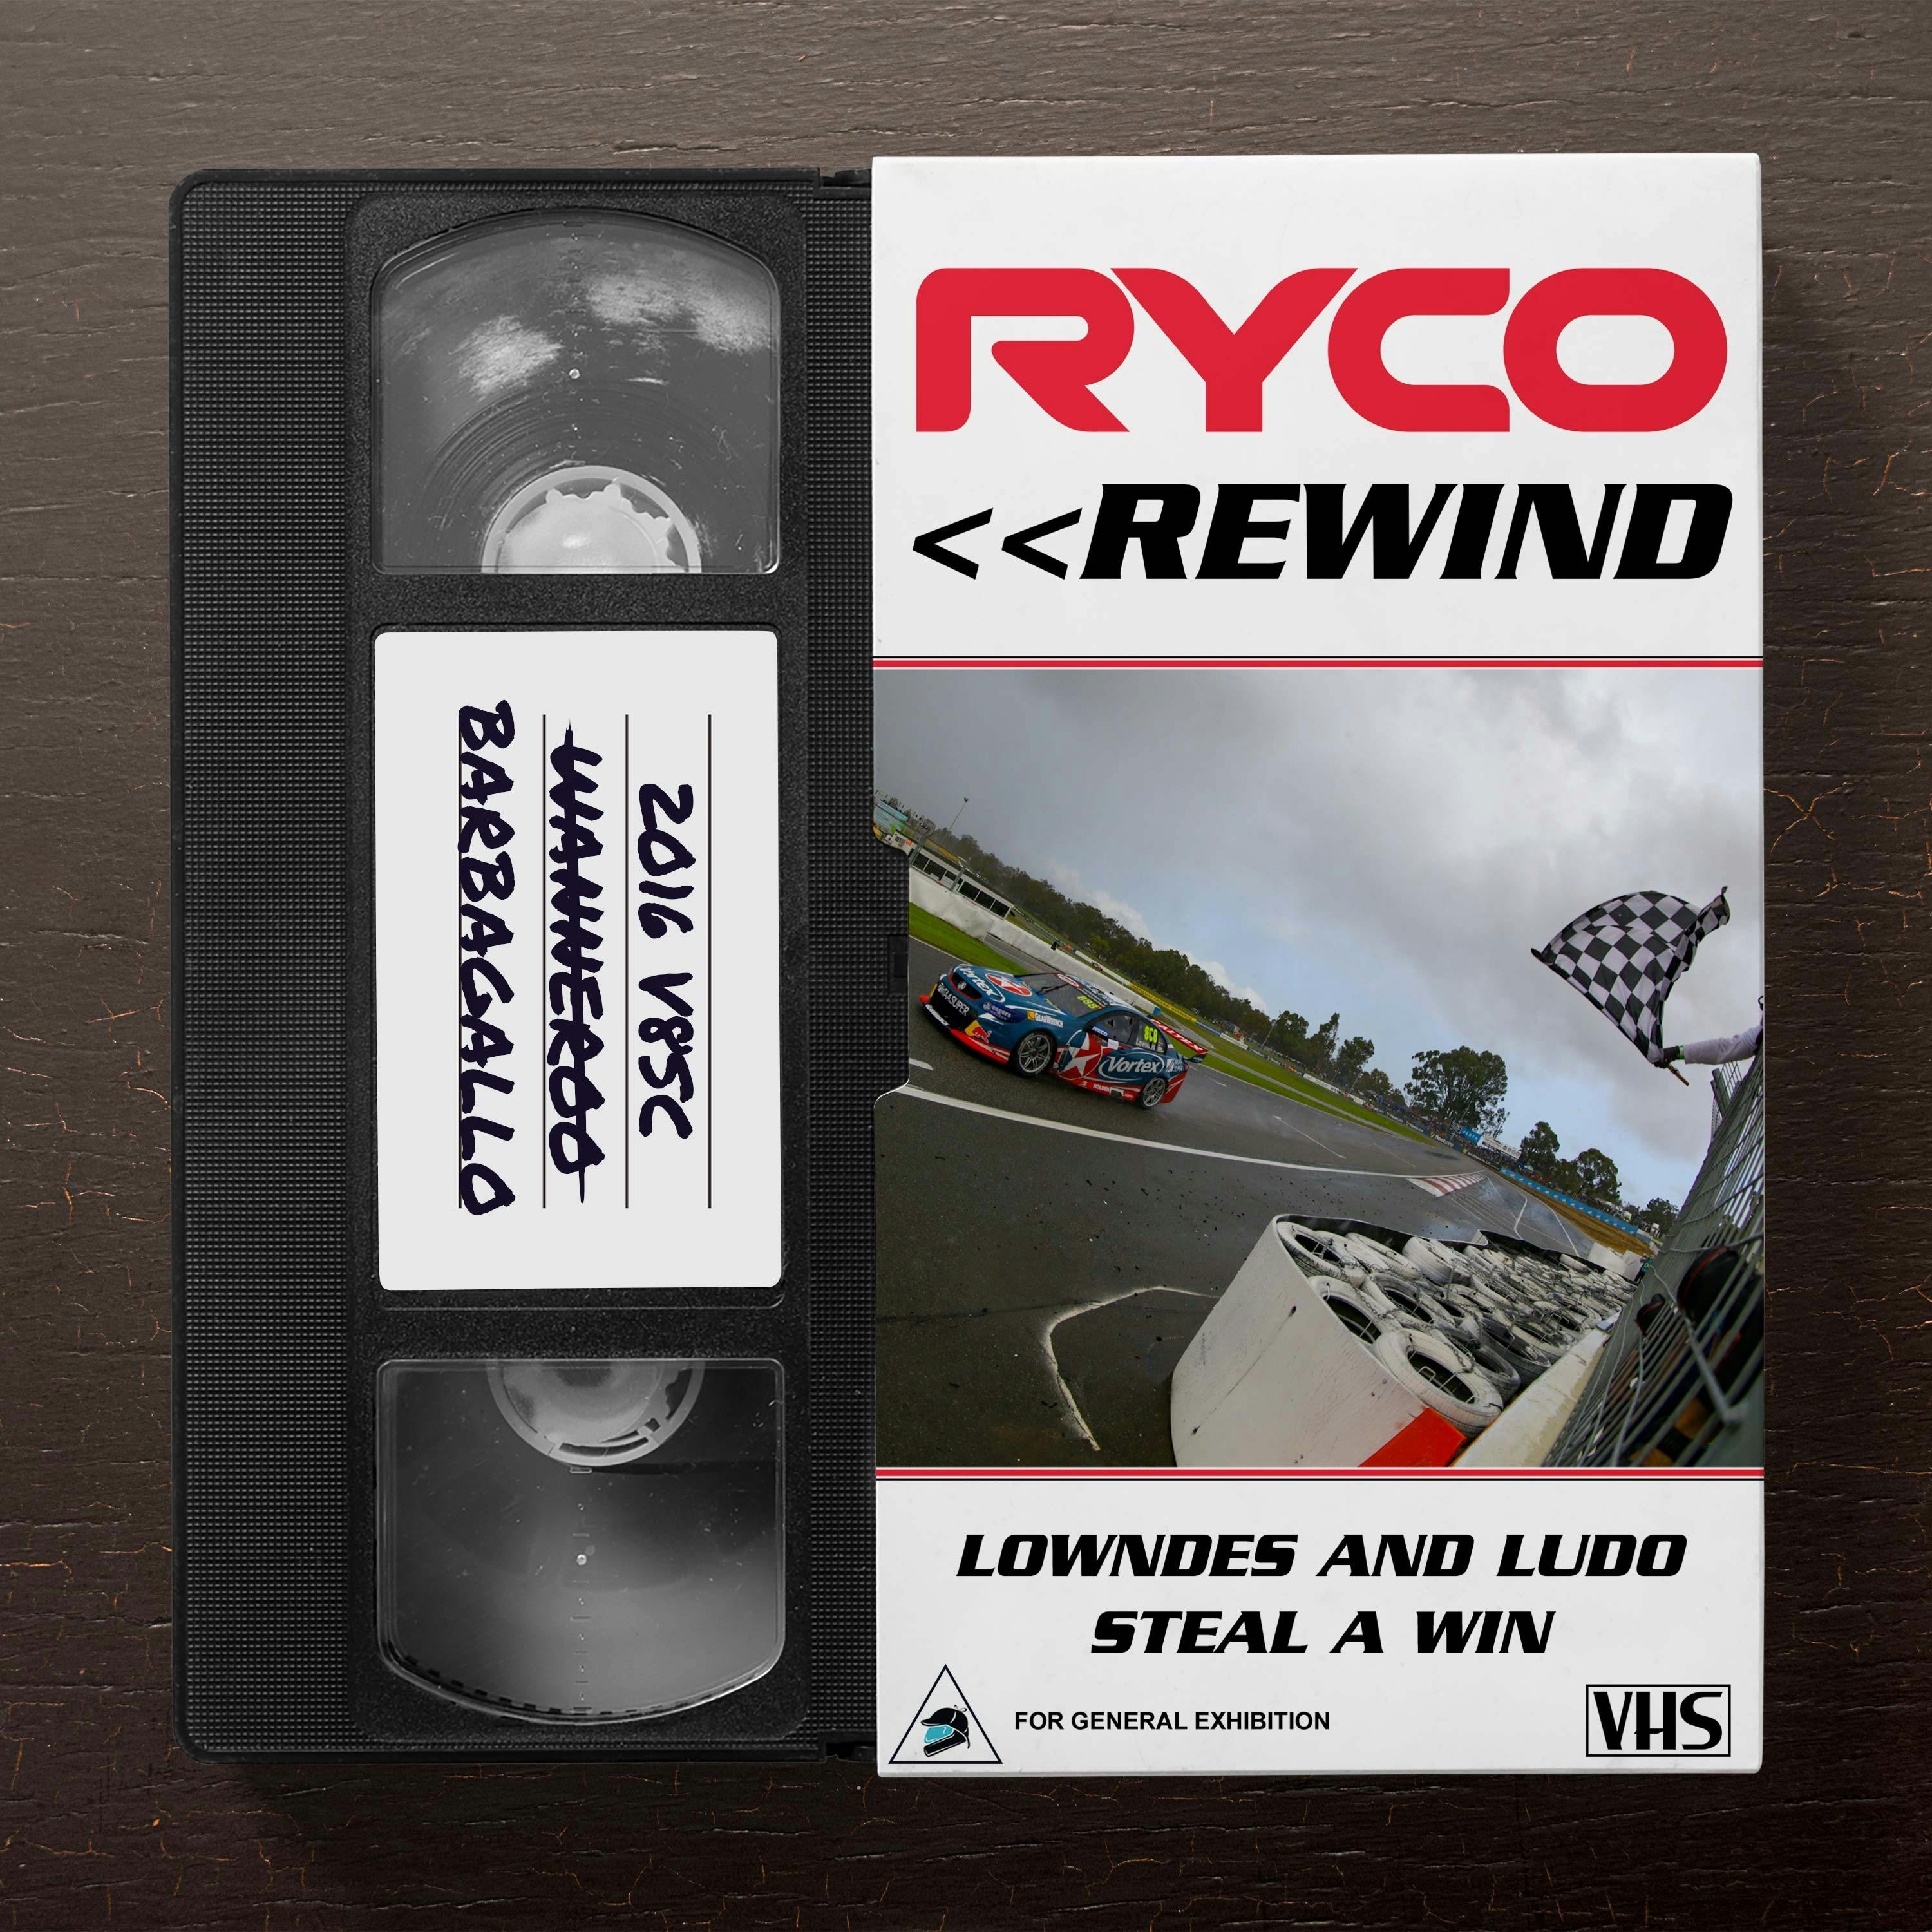 Ryco Rewind: Lowndes and Ludo steal a victory